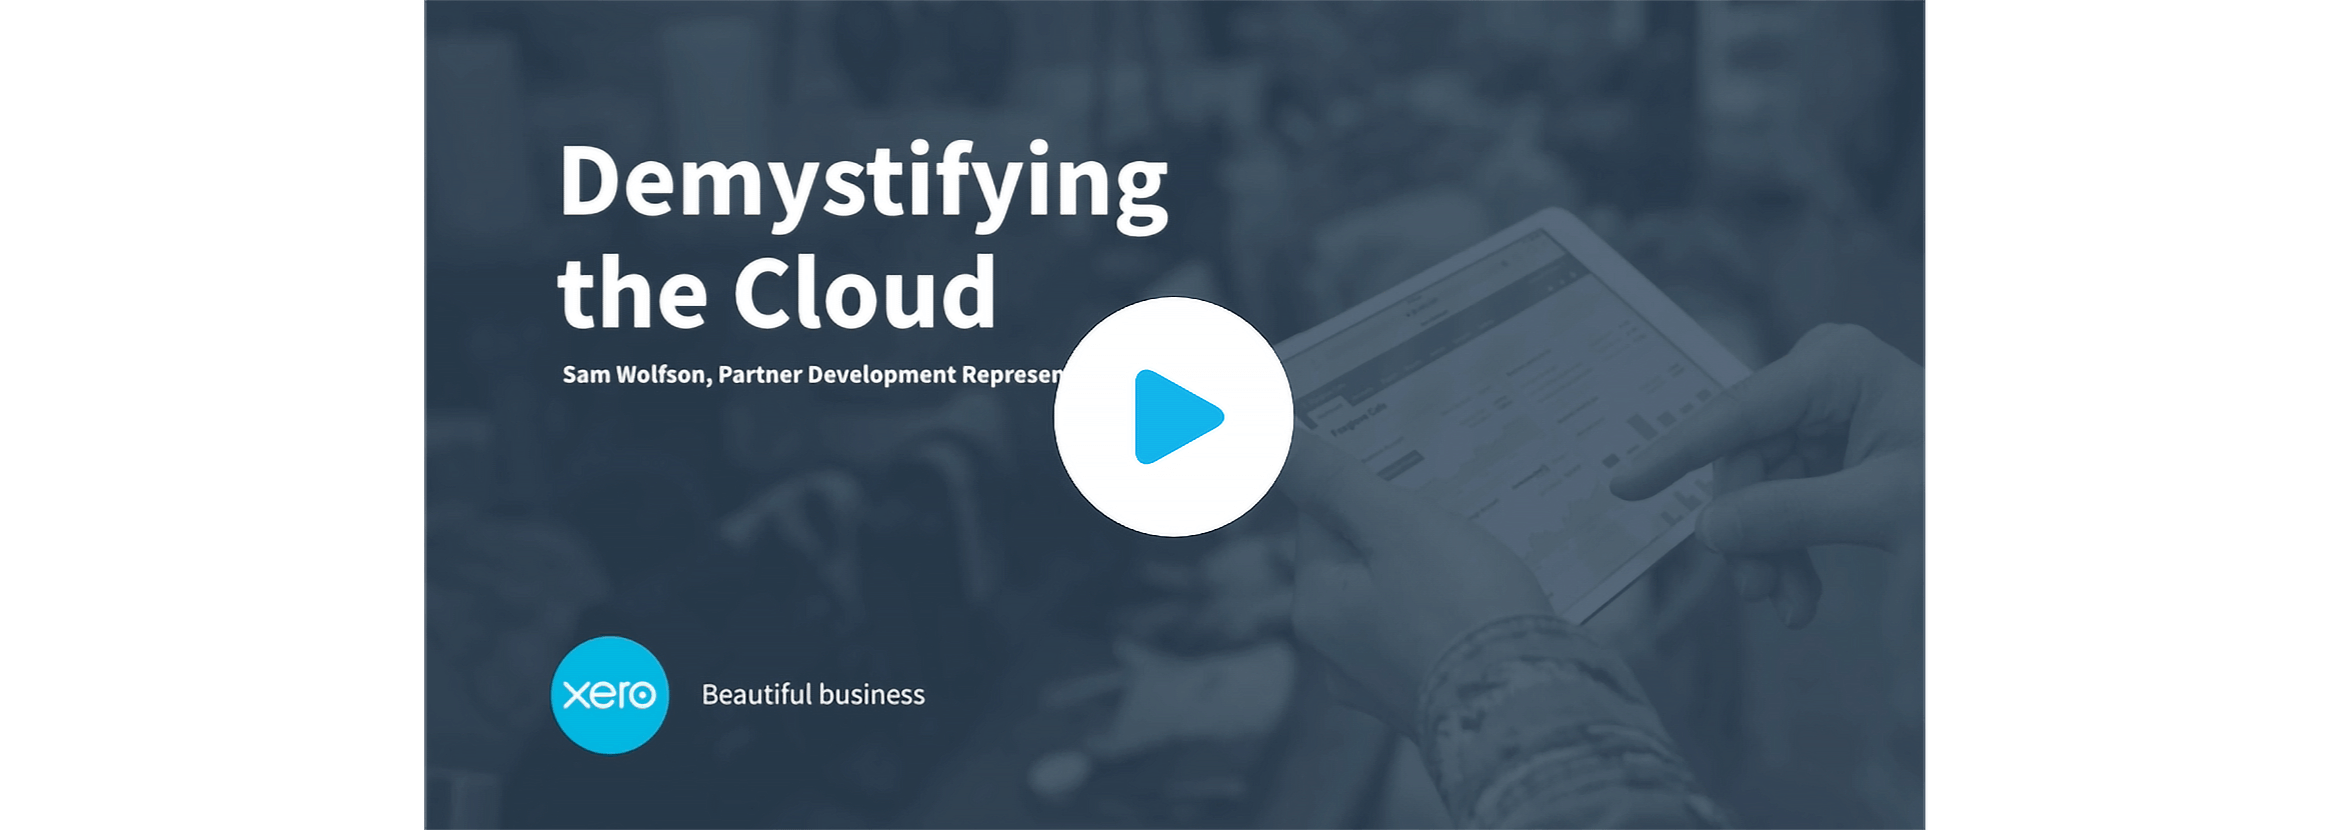 The title slide of the webinar, Demystifying the cloud.